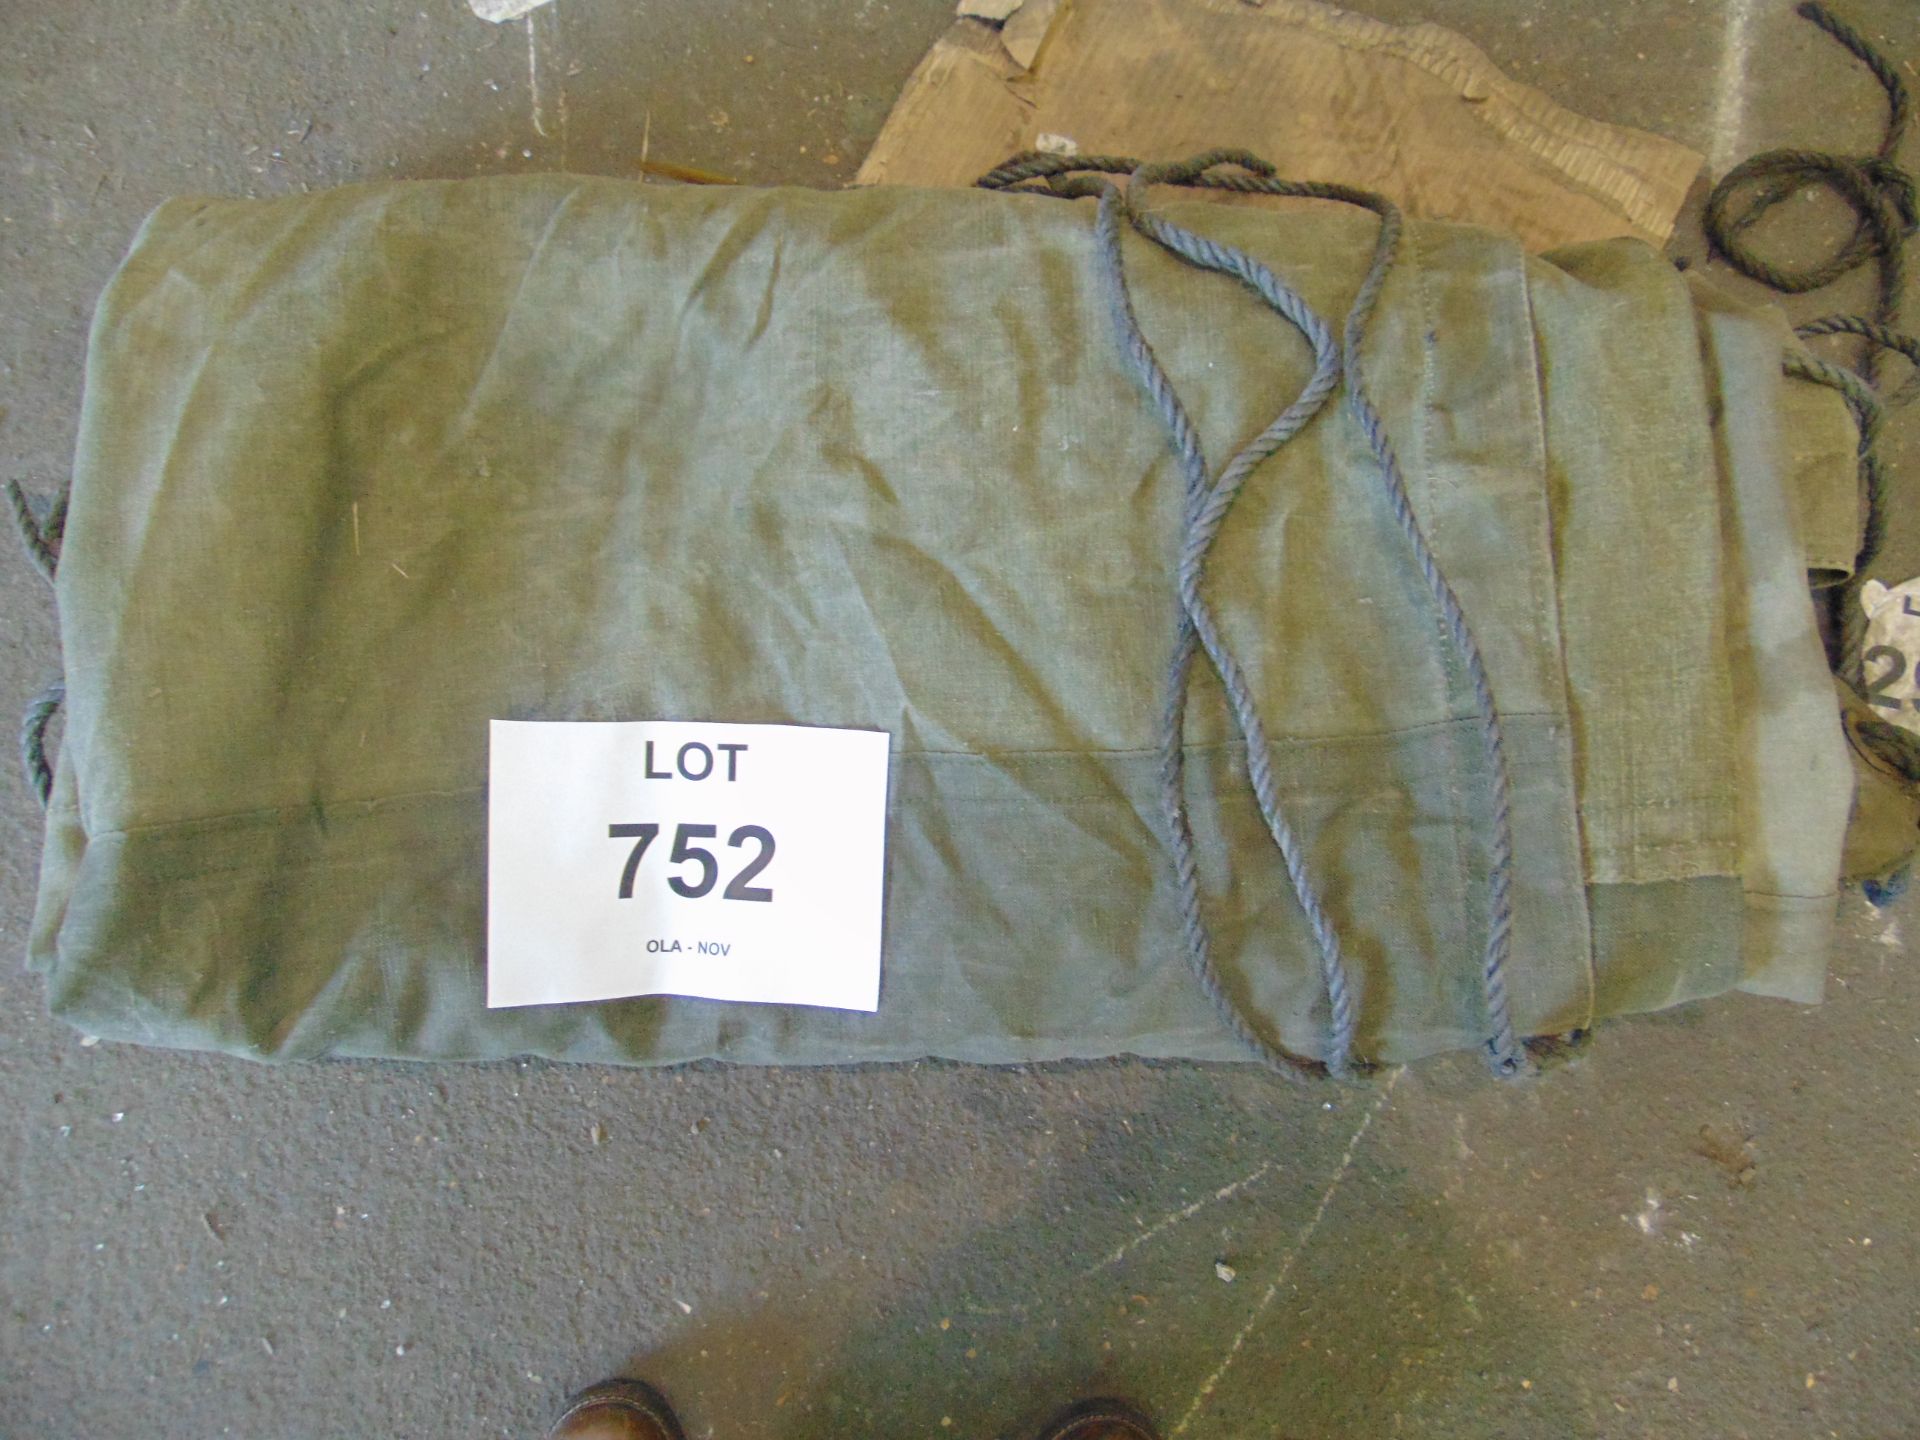 11ft X 11ft CANVAS TANK TARPAULIN FOR REAR DECK - Image 5 of 5